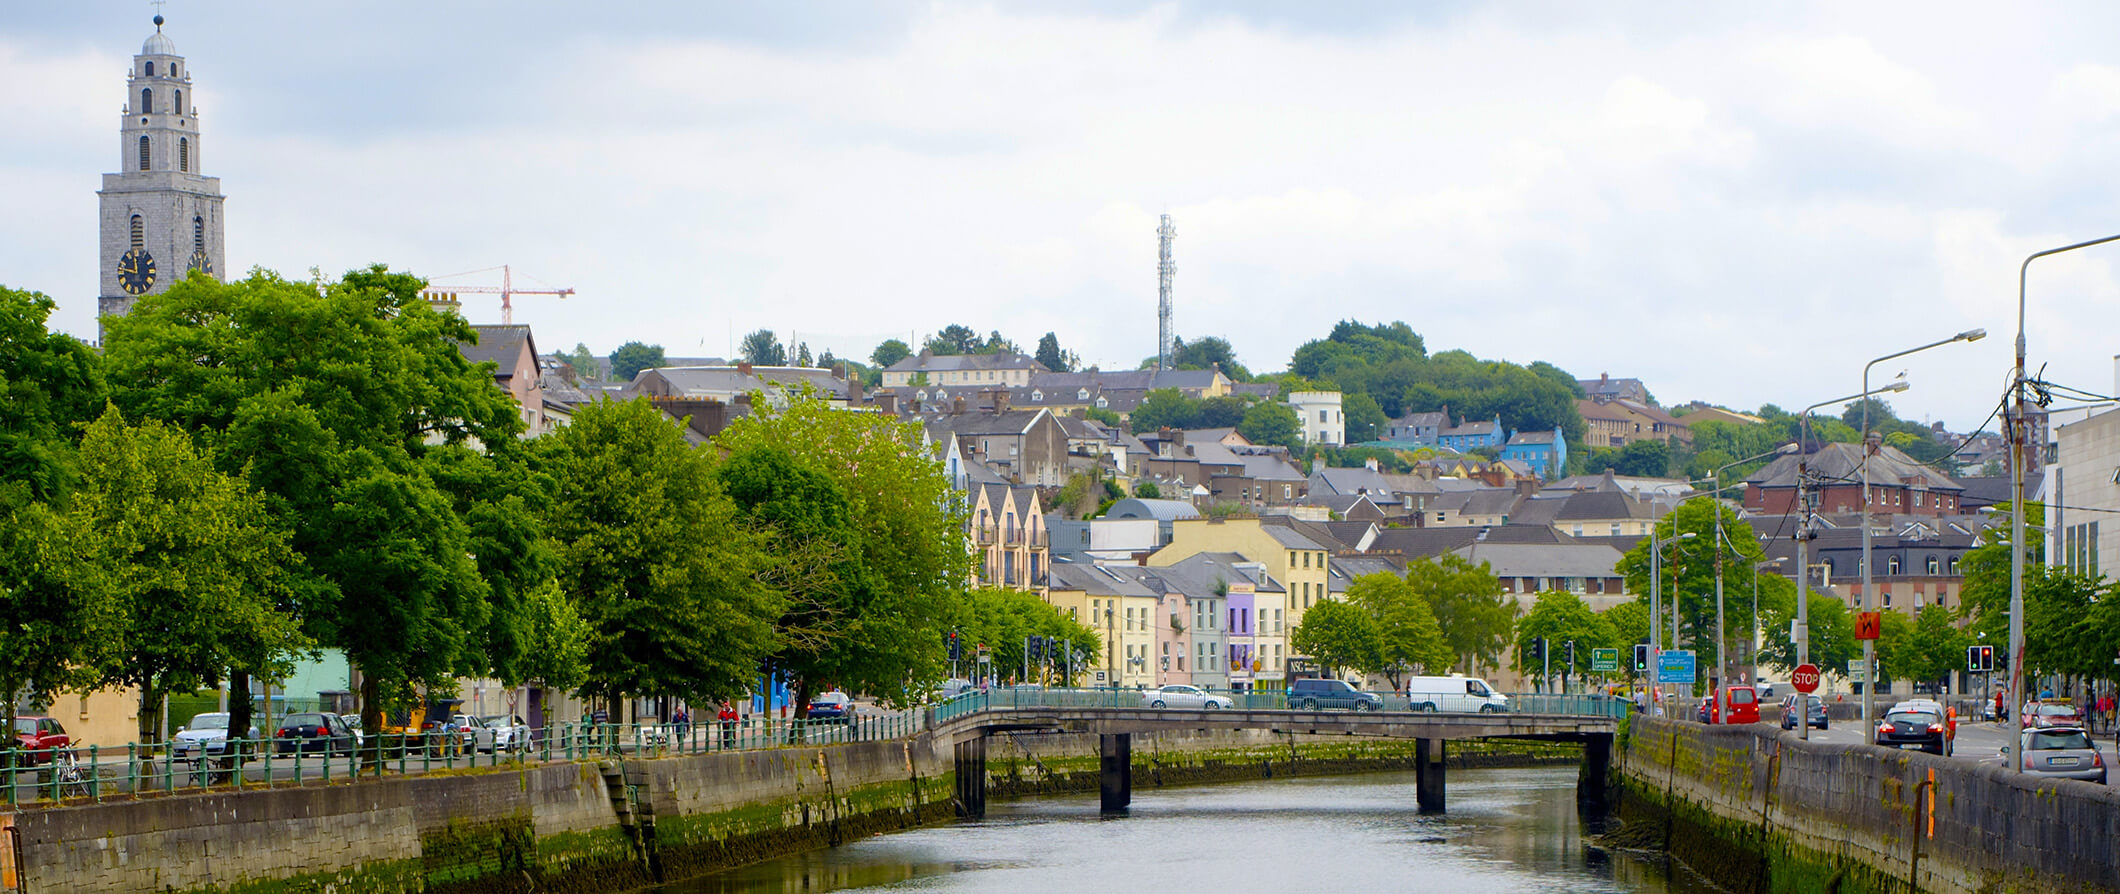 The city of Cork looking across the city river